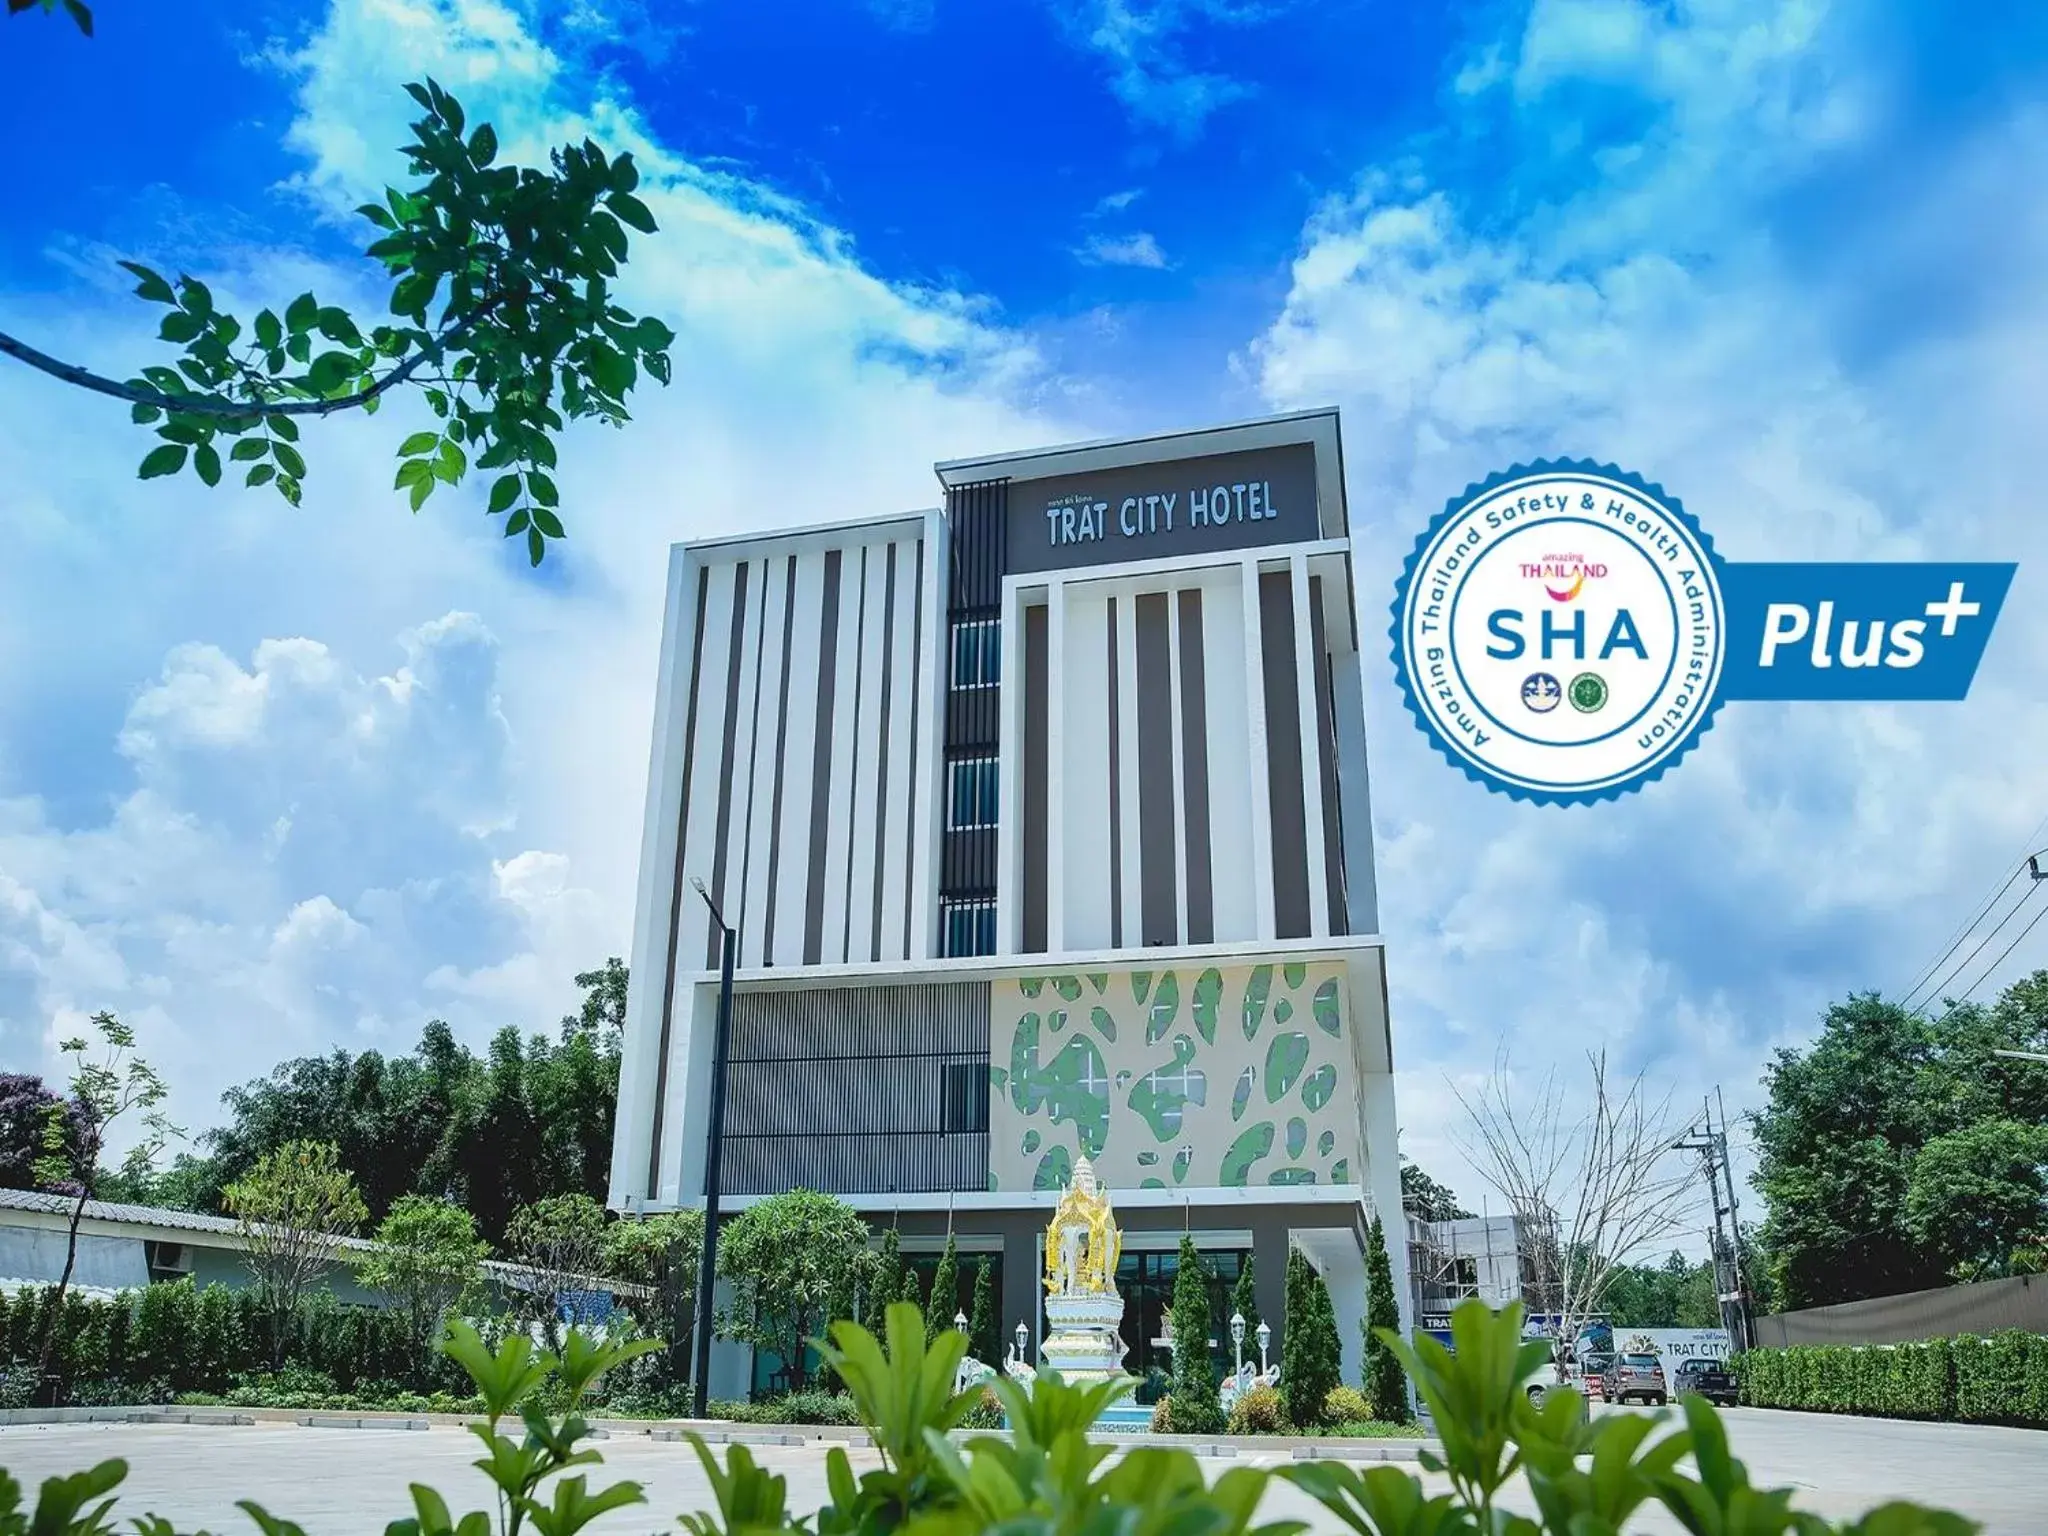 Property Building in Trat City Hotel